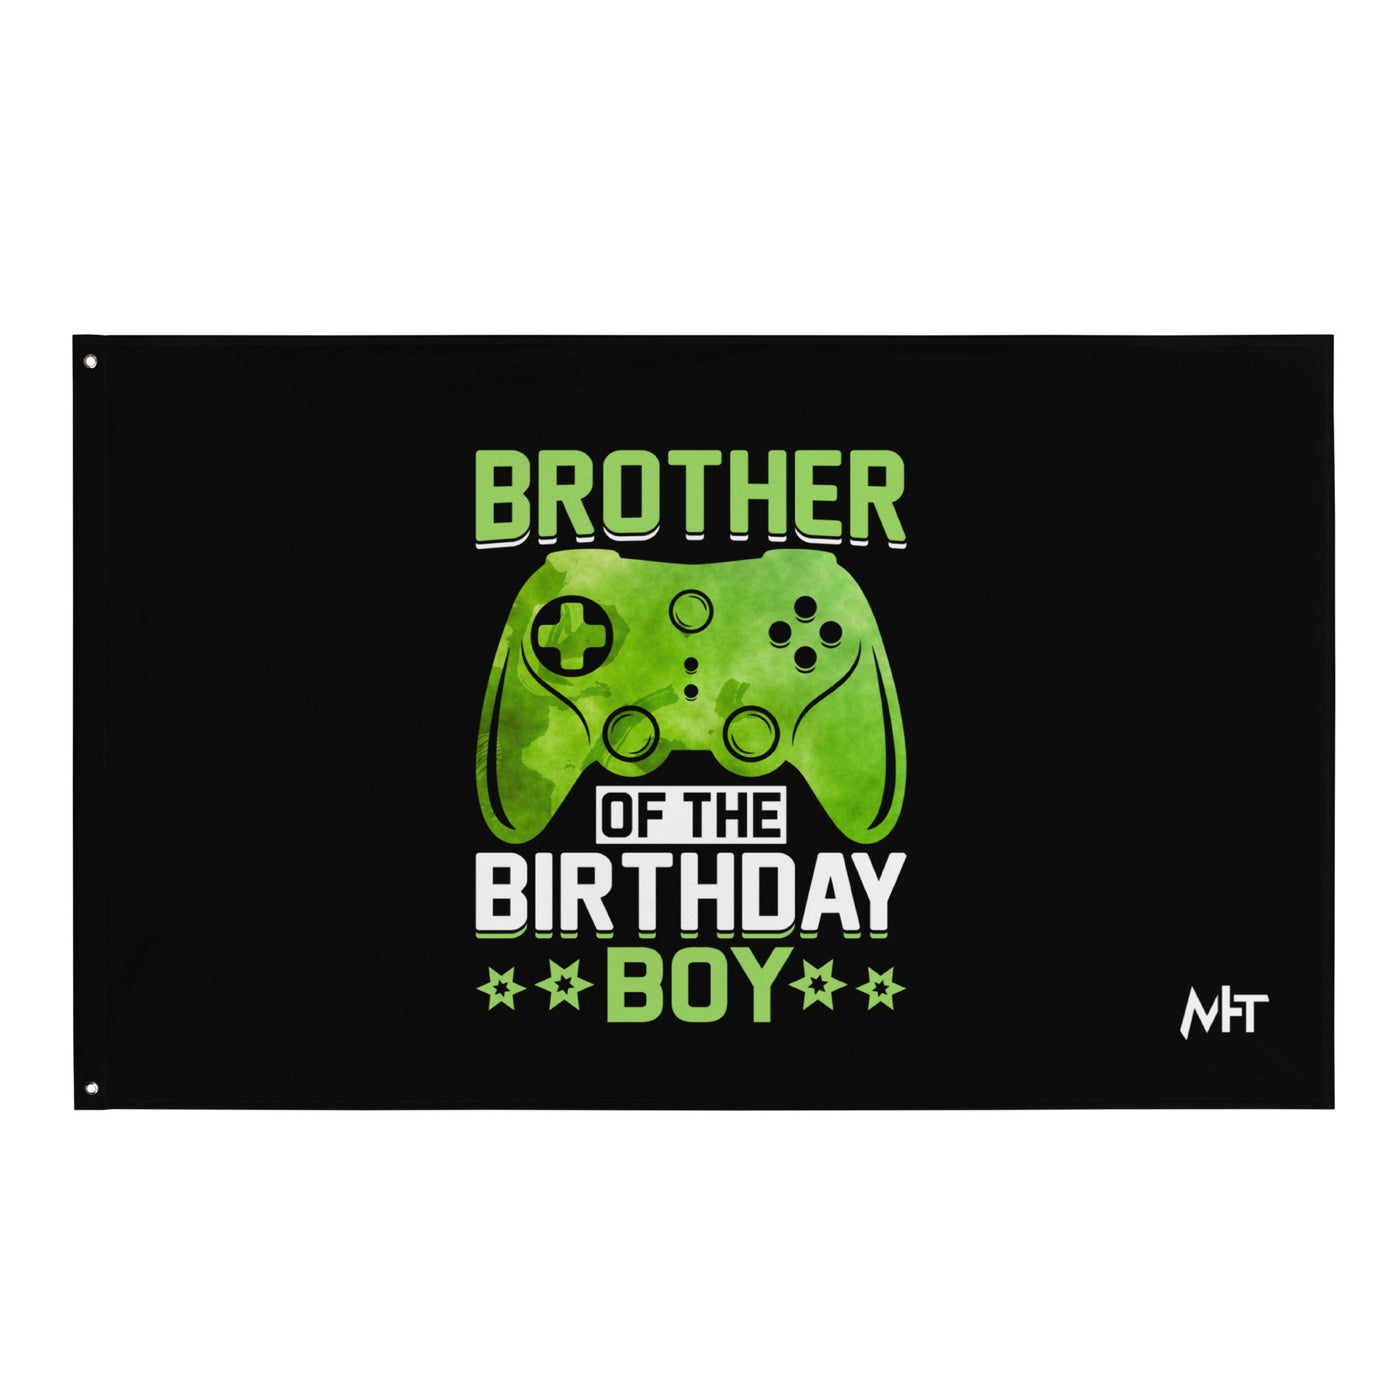 Brother of the Birthday Boy Flag